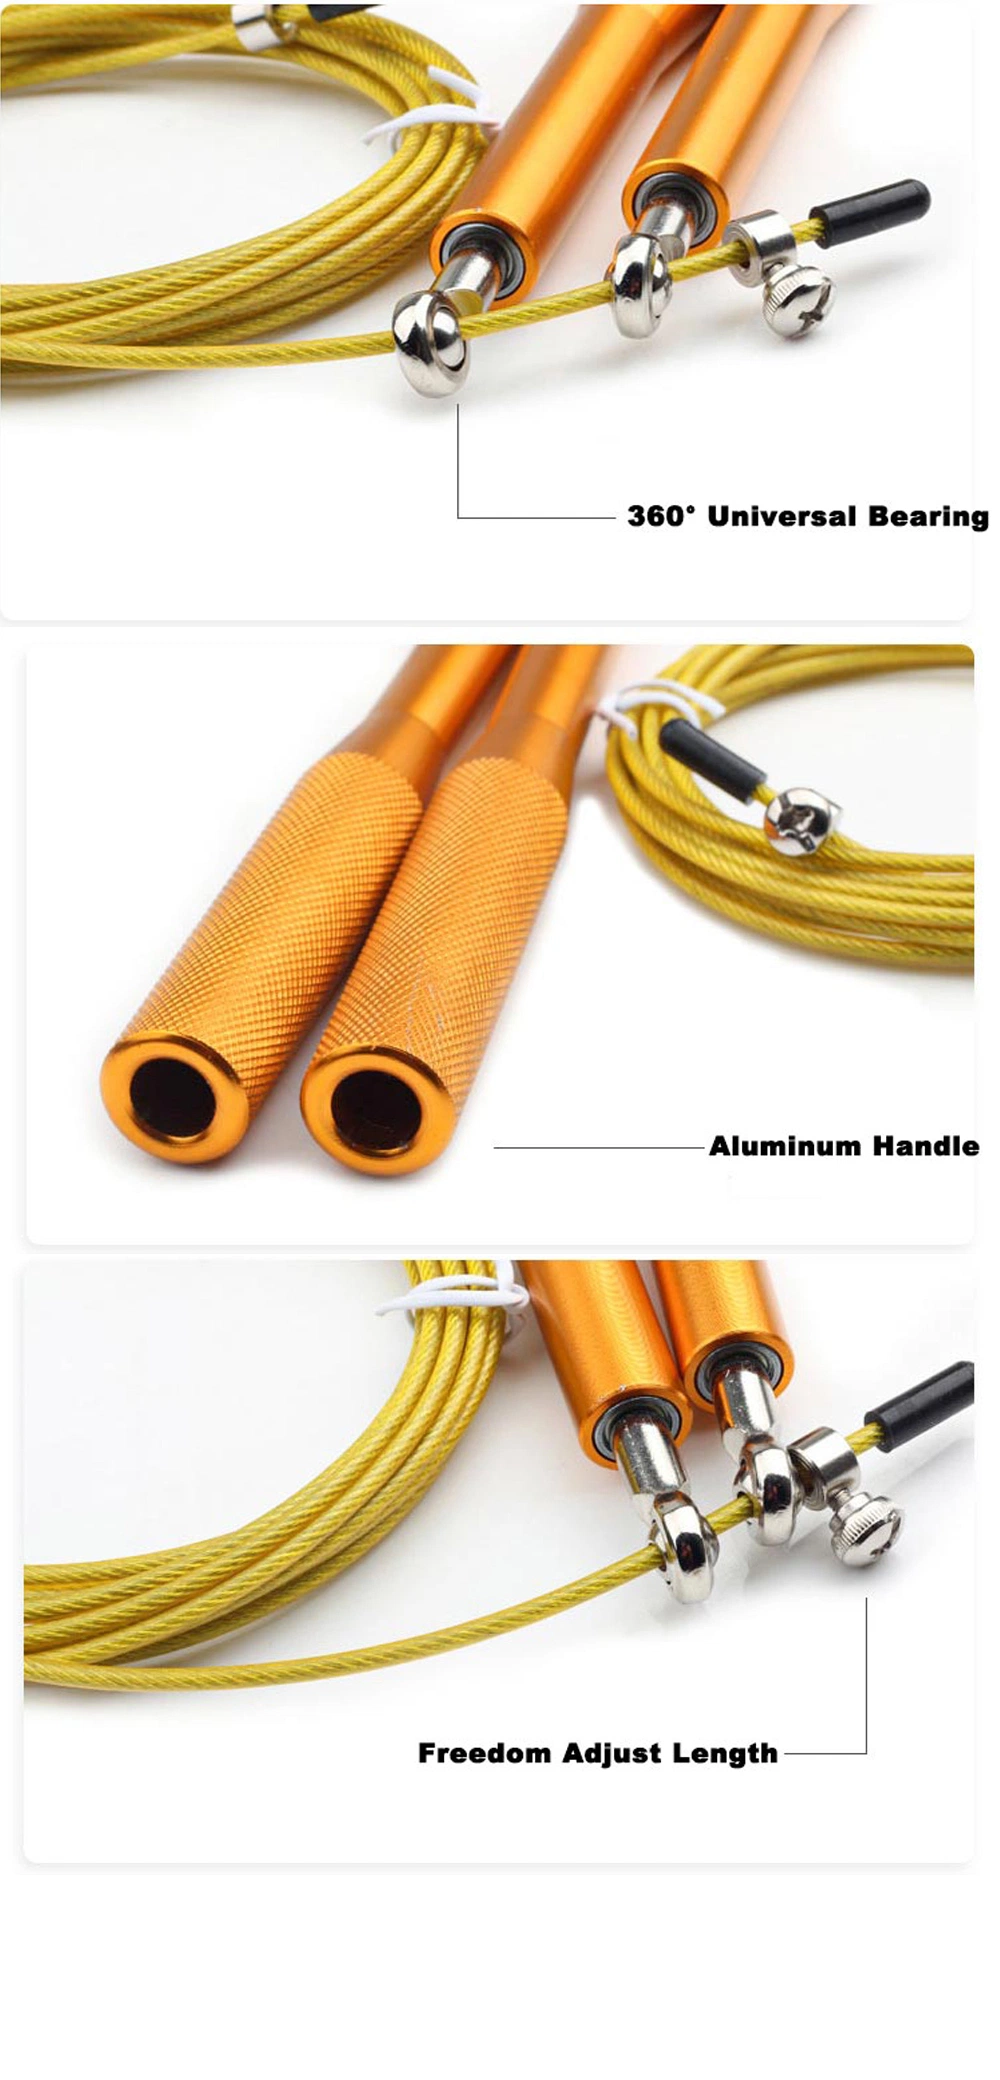 Adjustable Customized Logo Fitness Training Gym Weighted Metal Speed Bearing Jump Skipping Rope